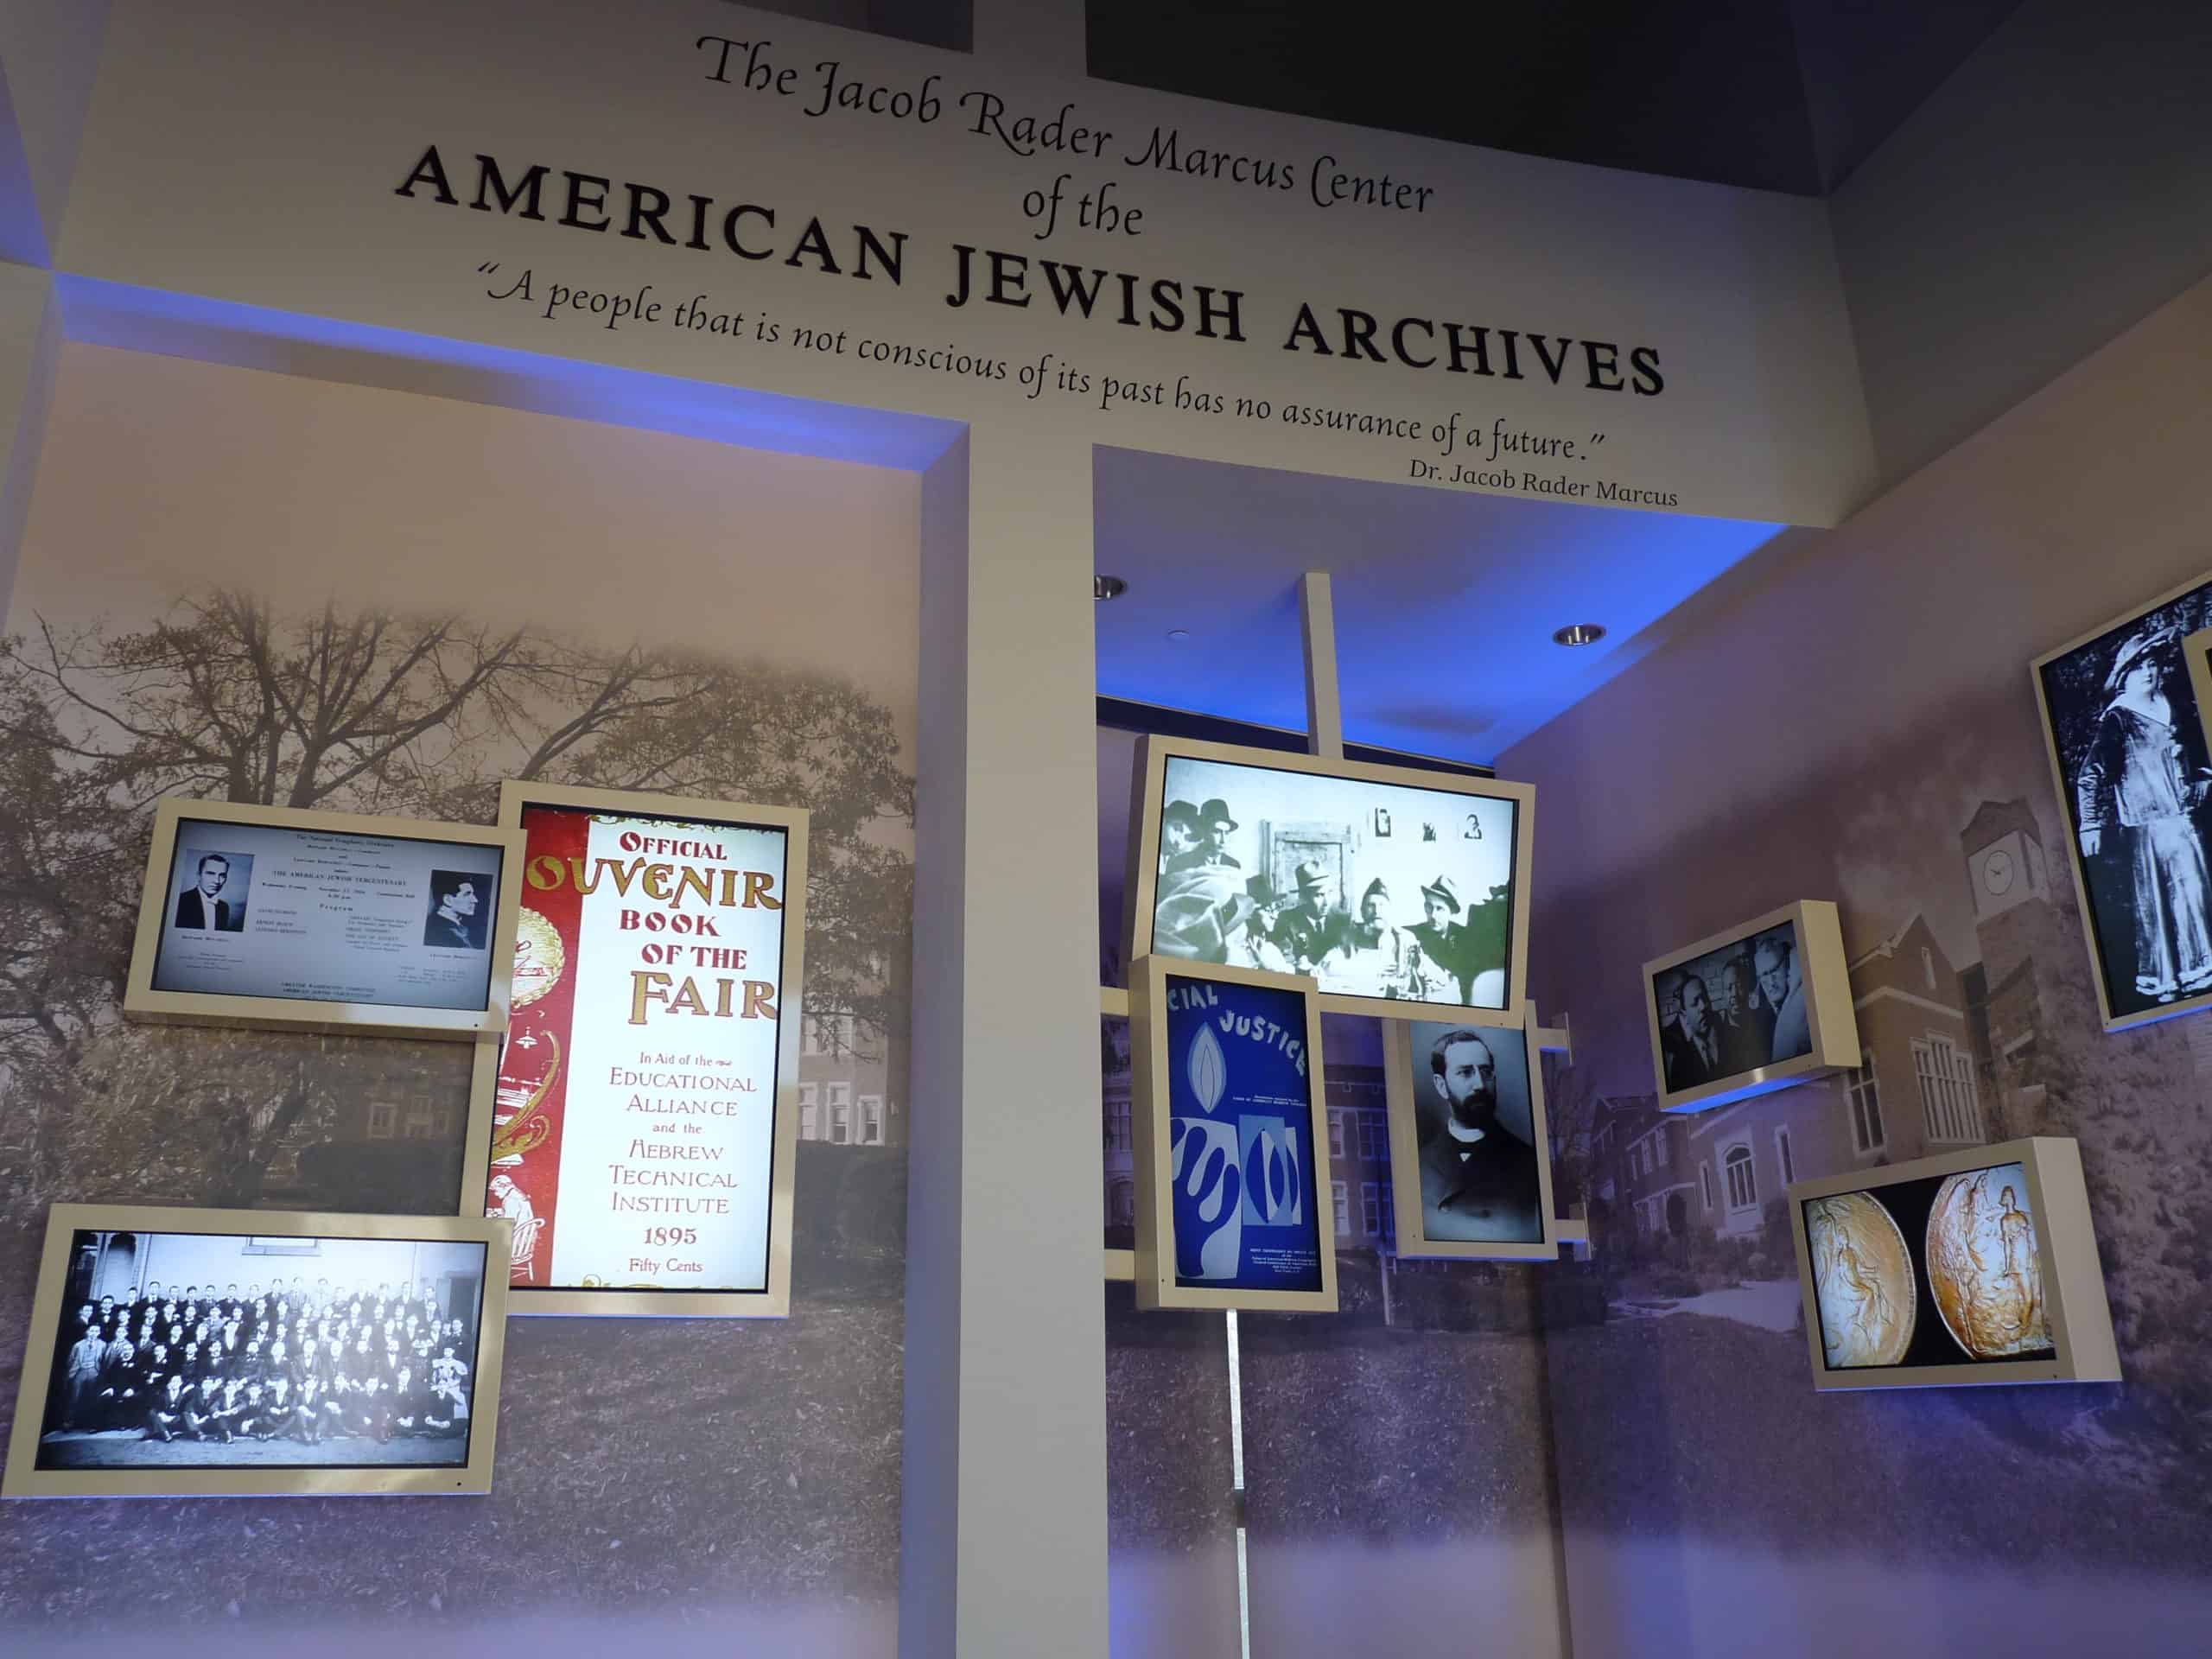 The American Jewish Archives lobby